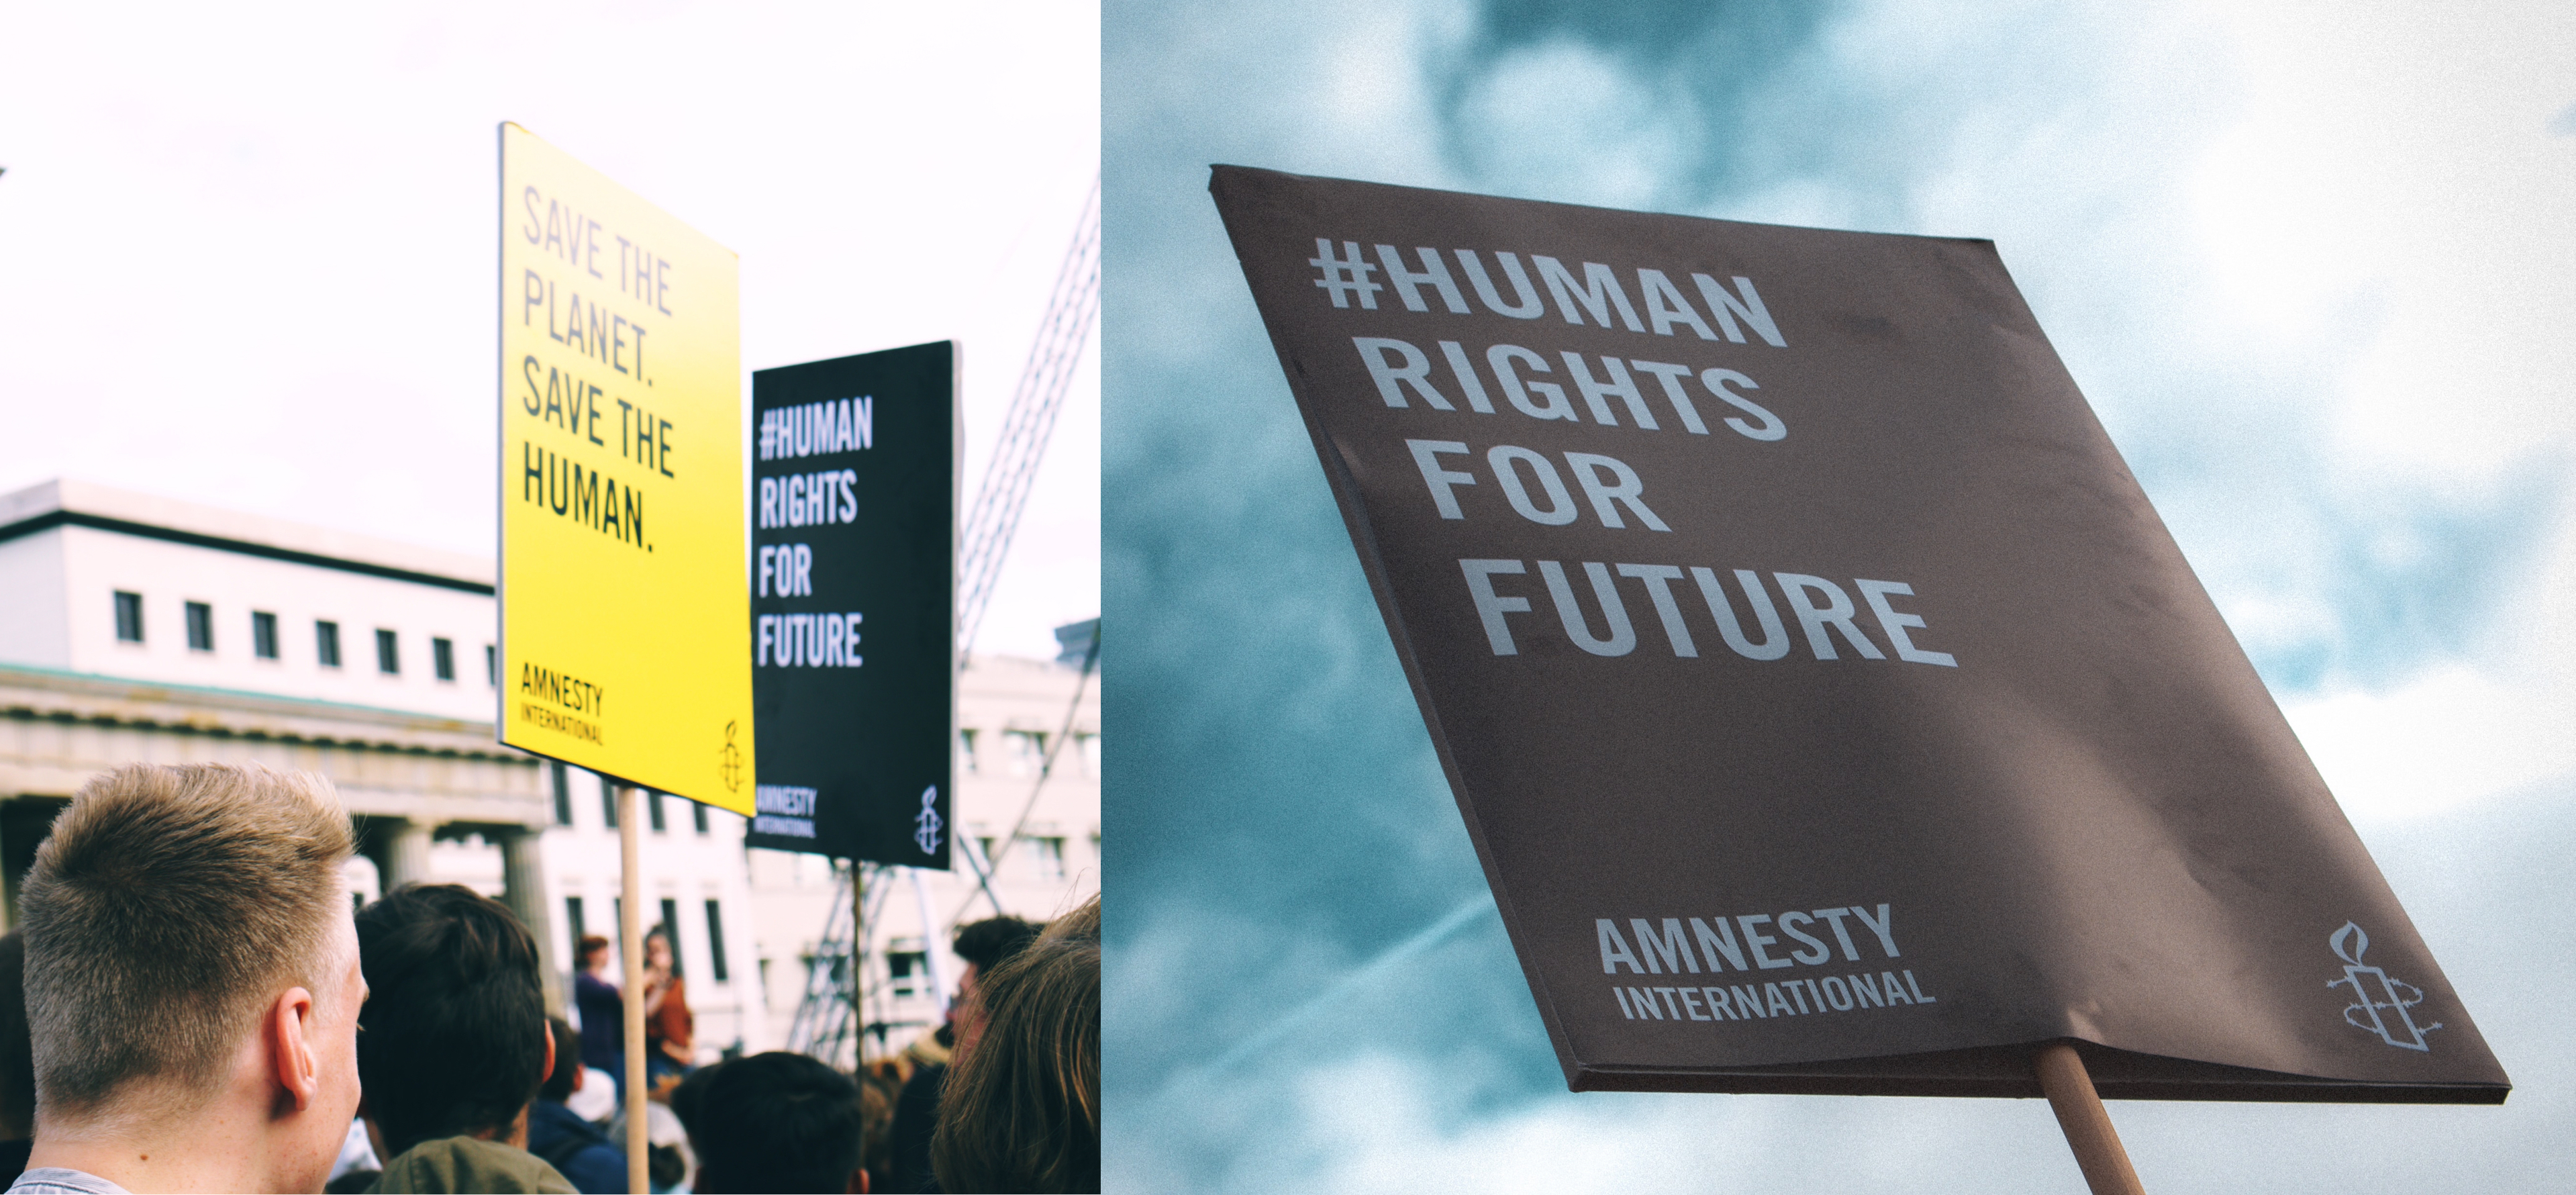 Human Rights For Future